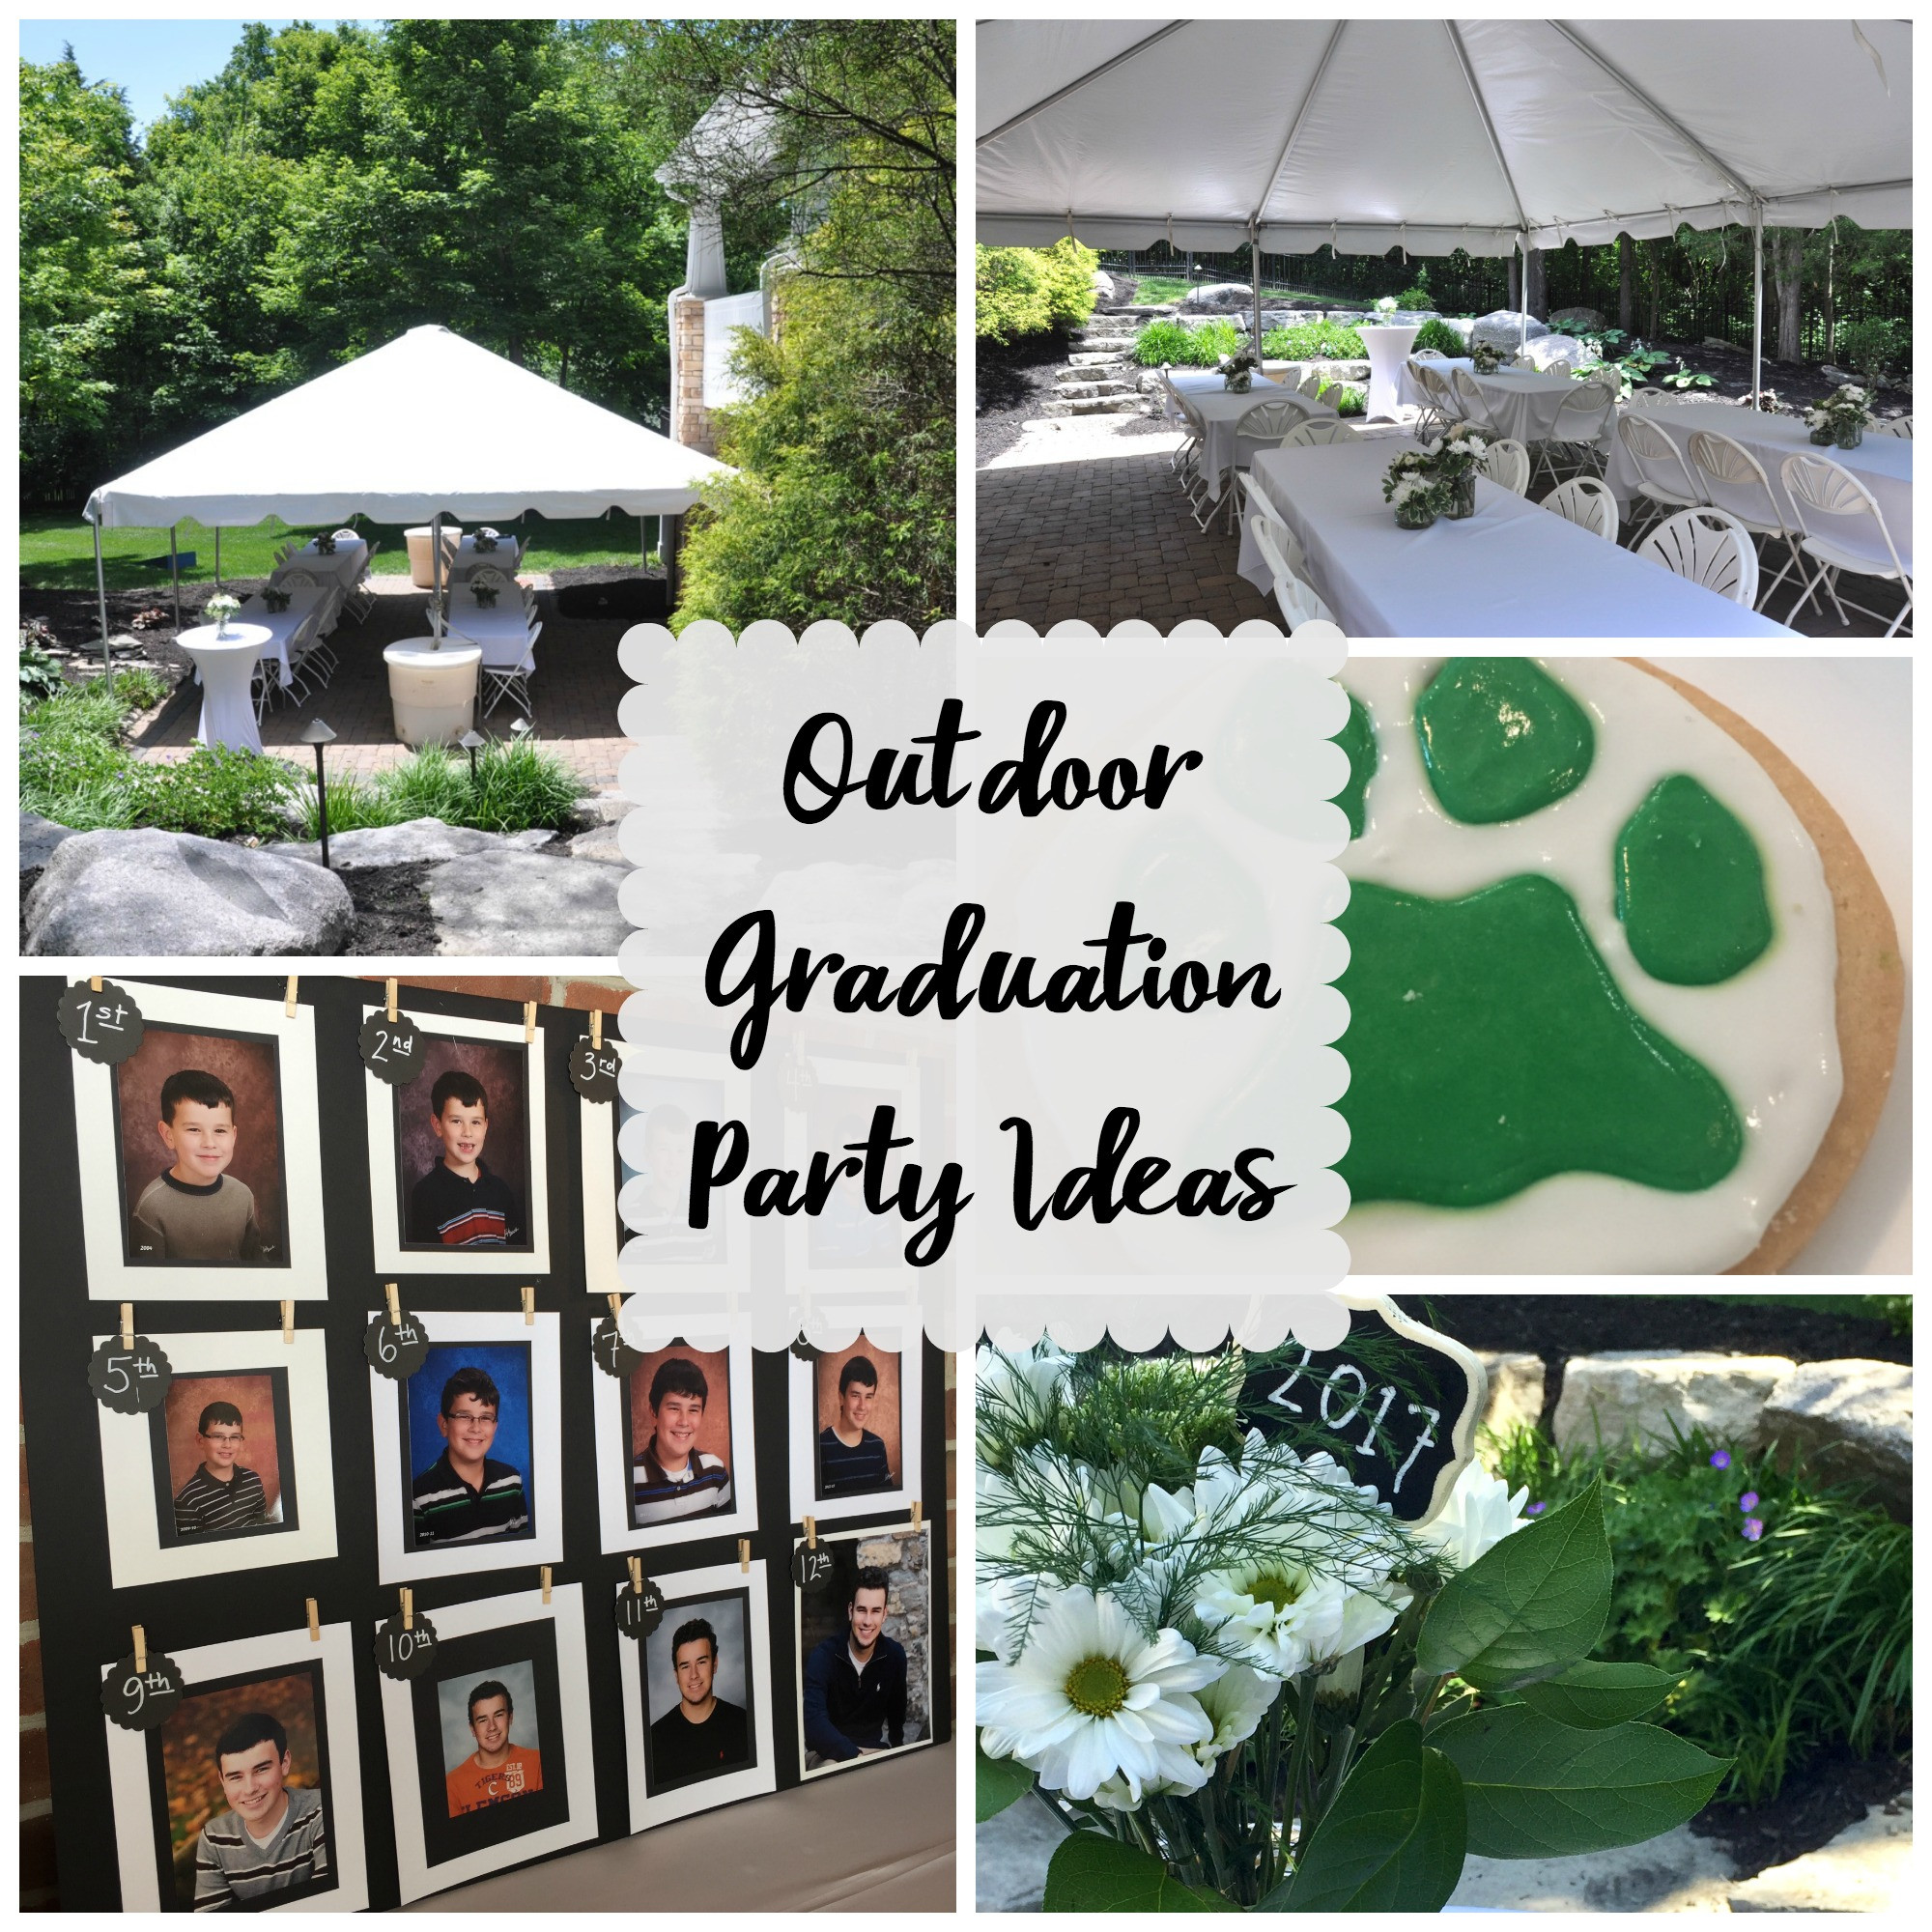 Bachelor Graduation Backyard Party Decorating Ideas
 Outdoor Graduation Party Evolution of Style